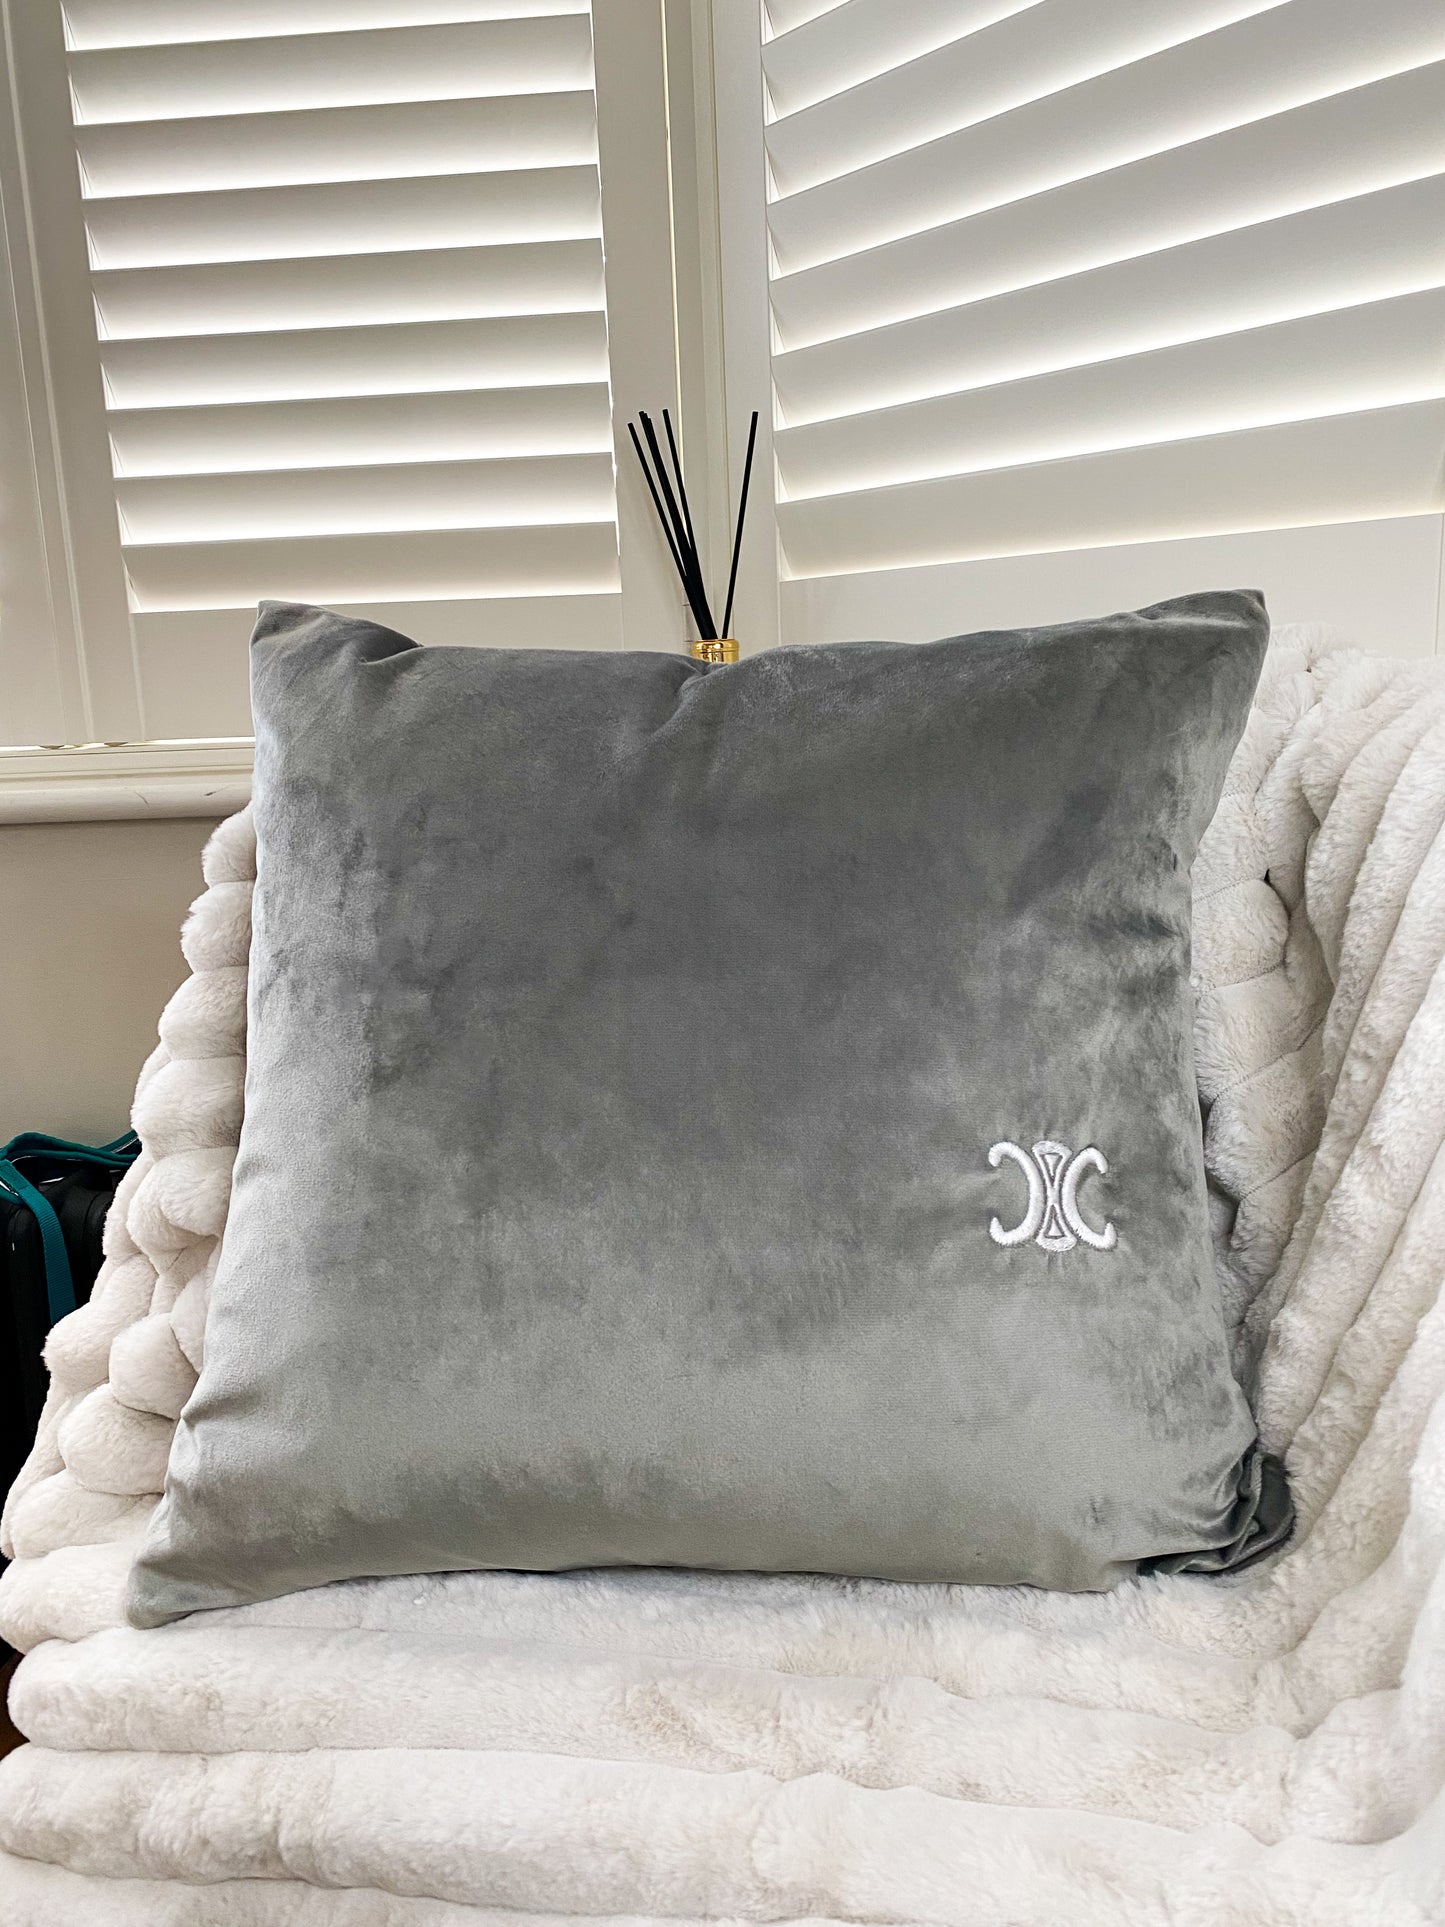 Suede C Grey and White Bespoke Cushion Cover